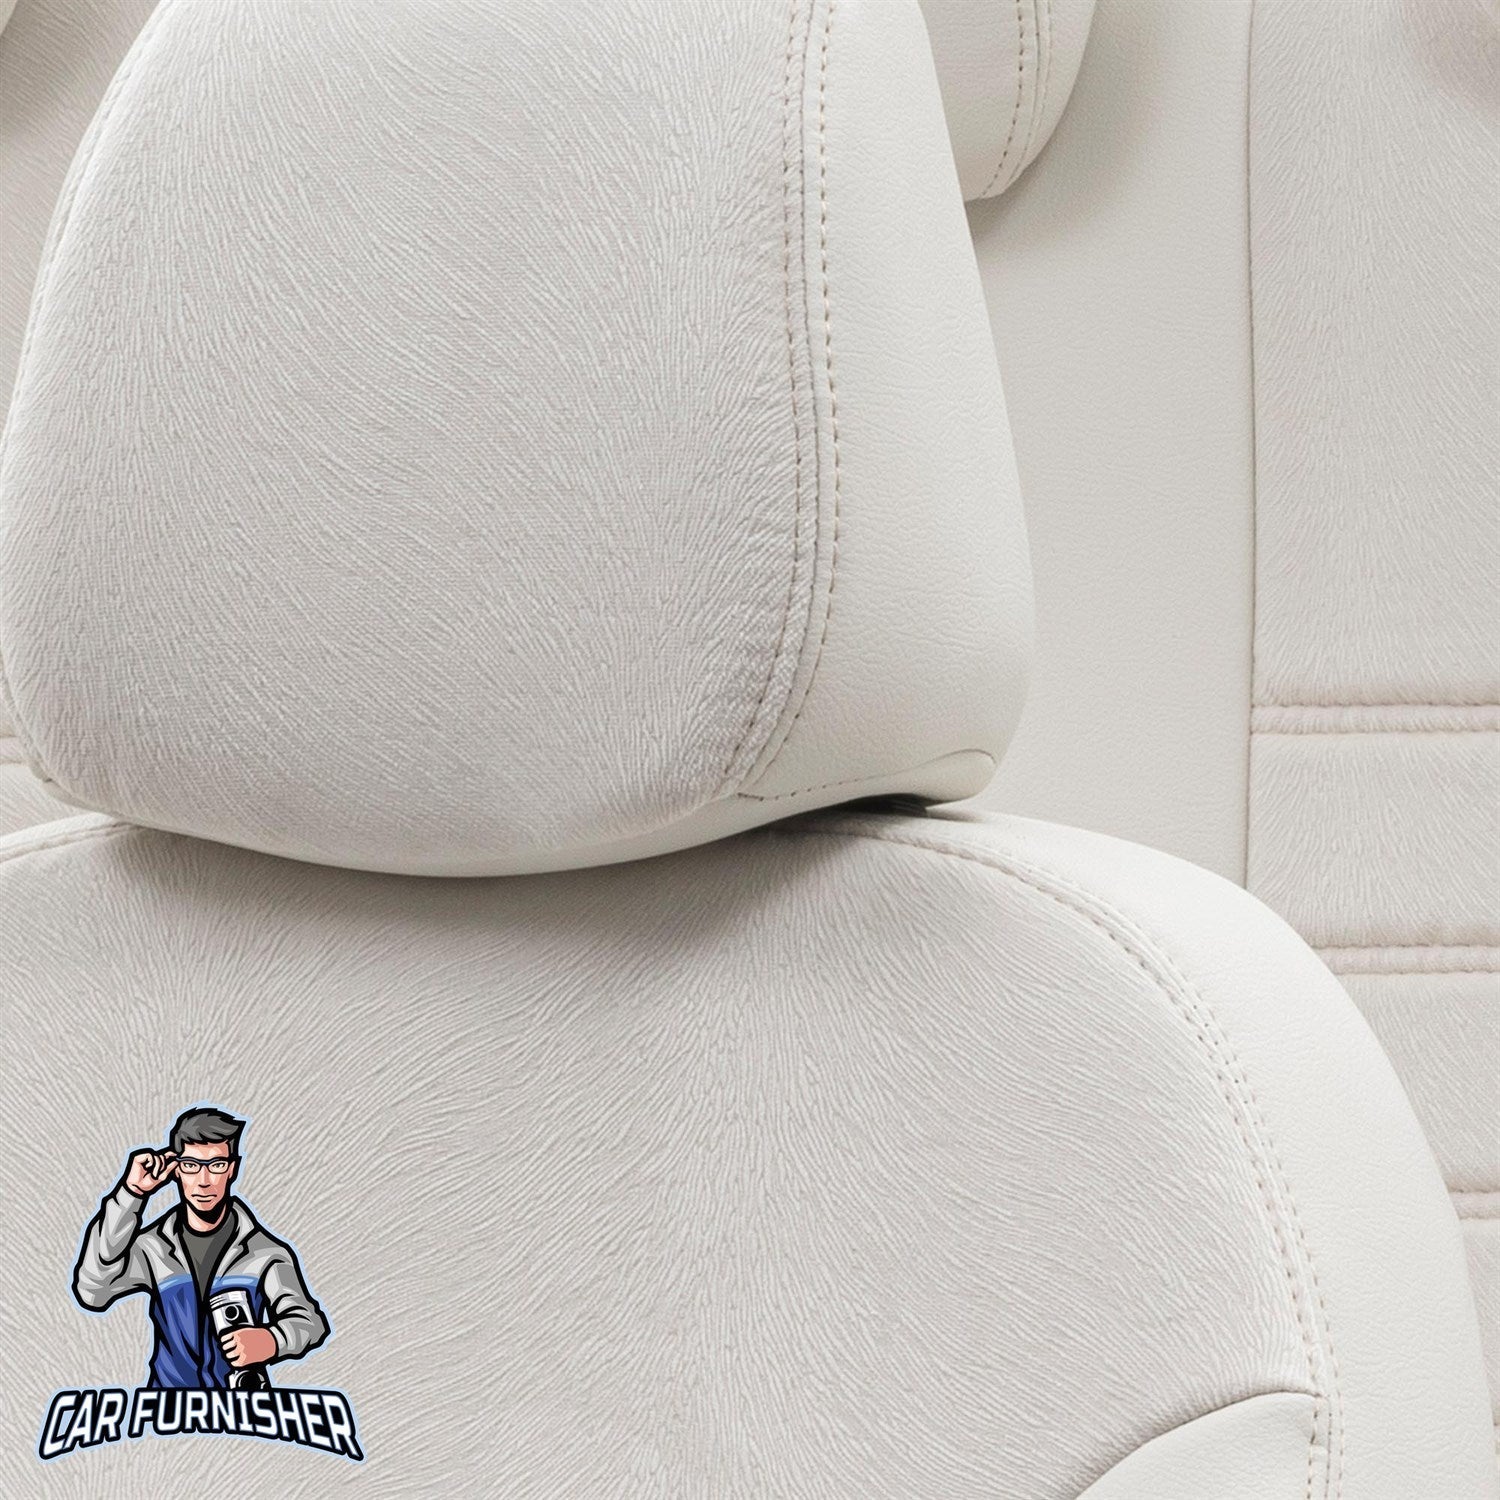 Ford Ranger Seat Covers London Foal Feather Design Ivory Leather & Foal Feather